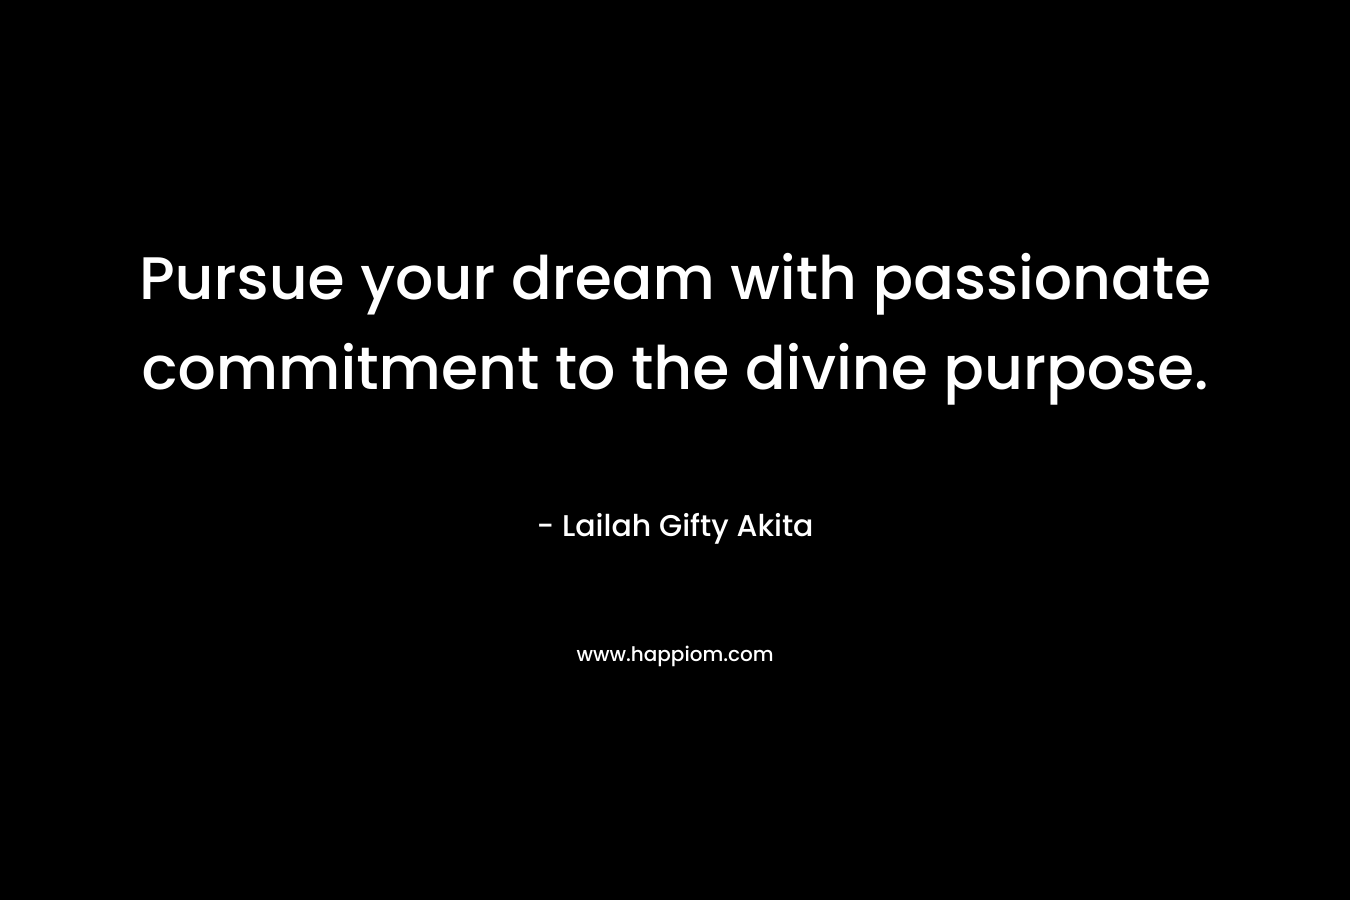 Pursue your dream with passionate commitment to the divine purpose.